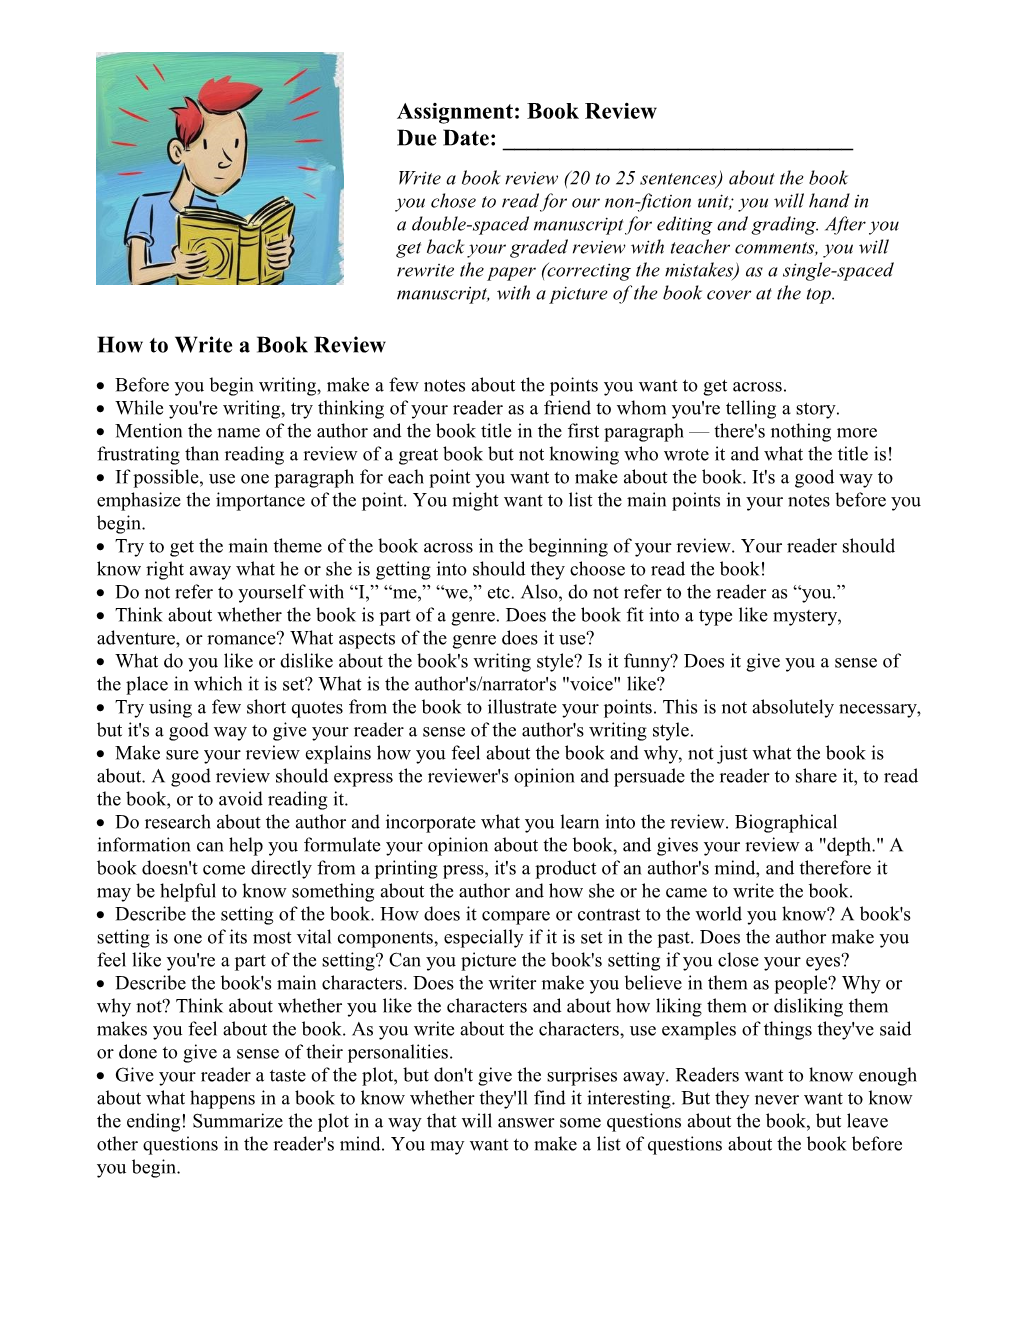 How to Write a Book Review s1